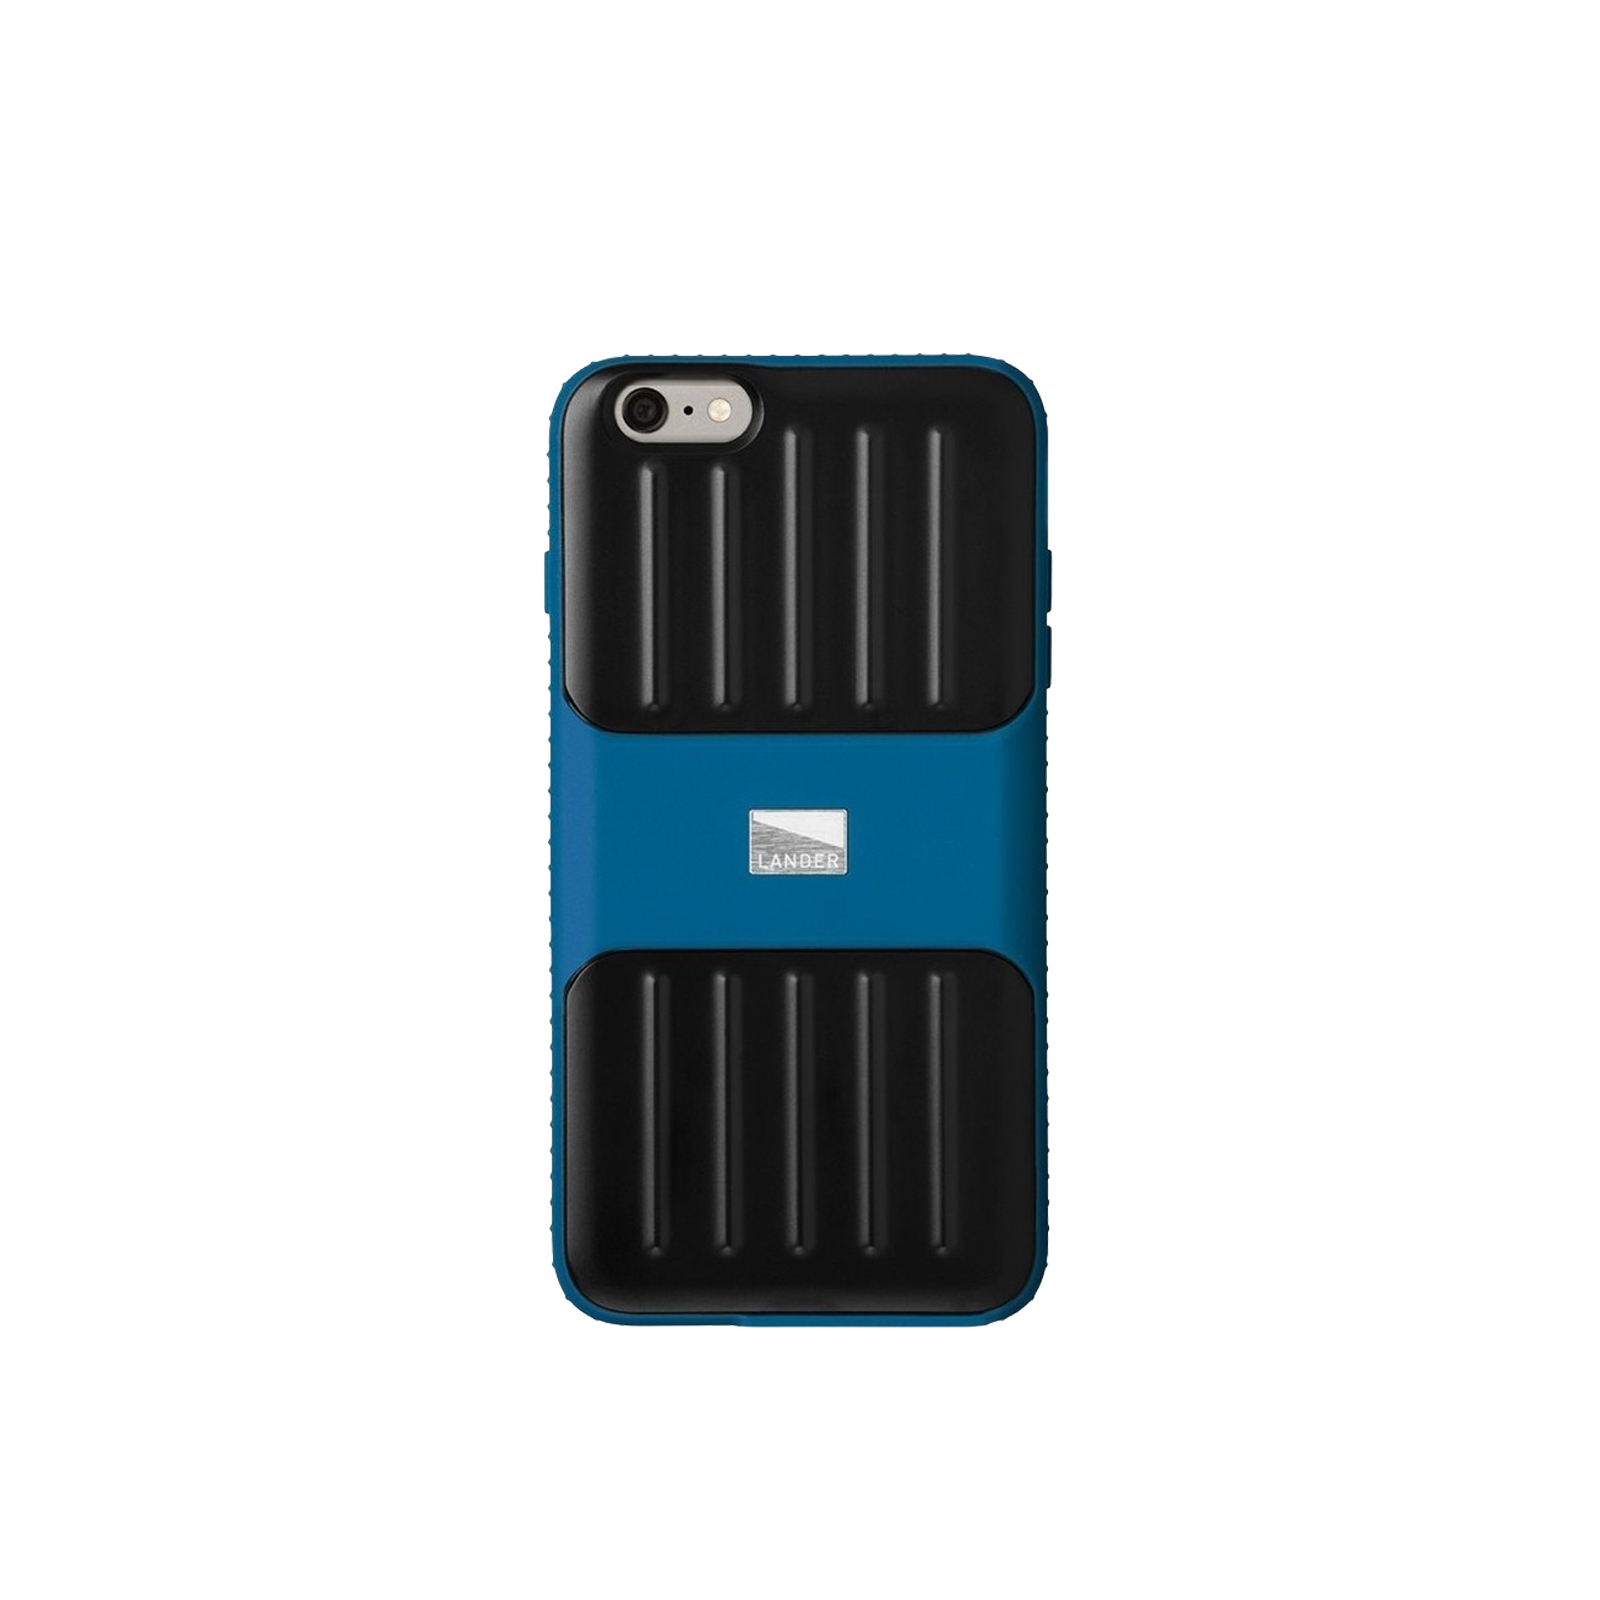 Powell iPhone 6 / 7 / 8 Case [Blue]